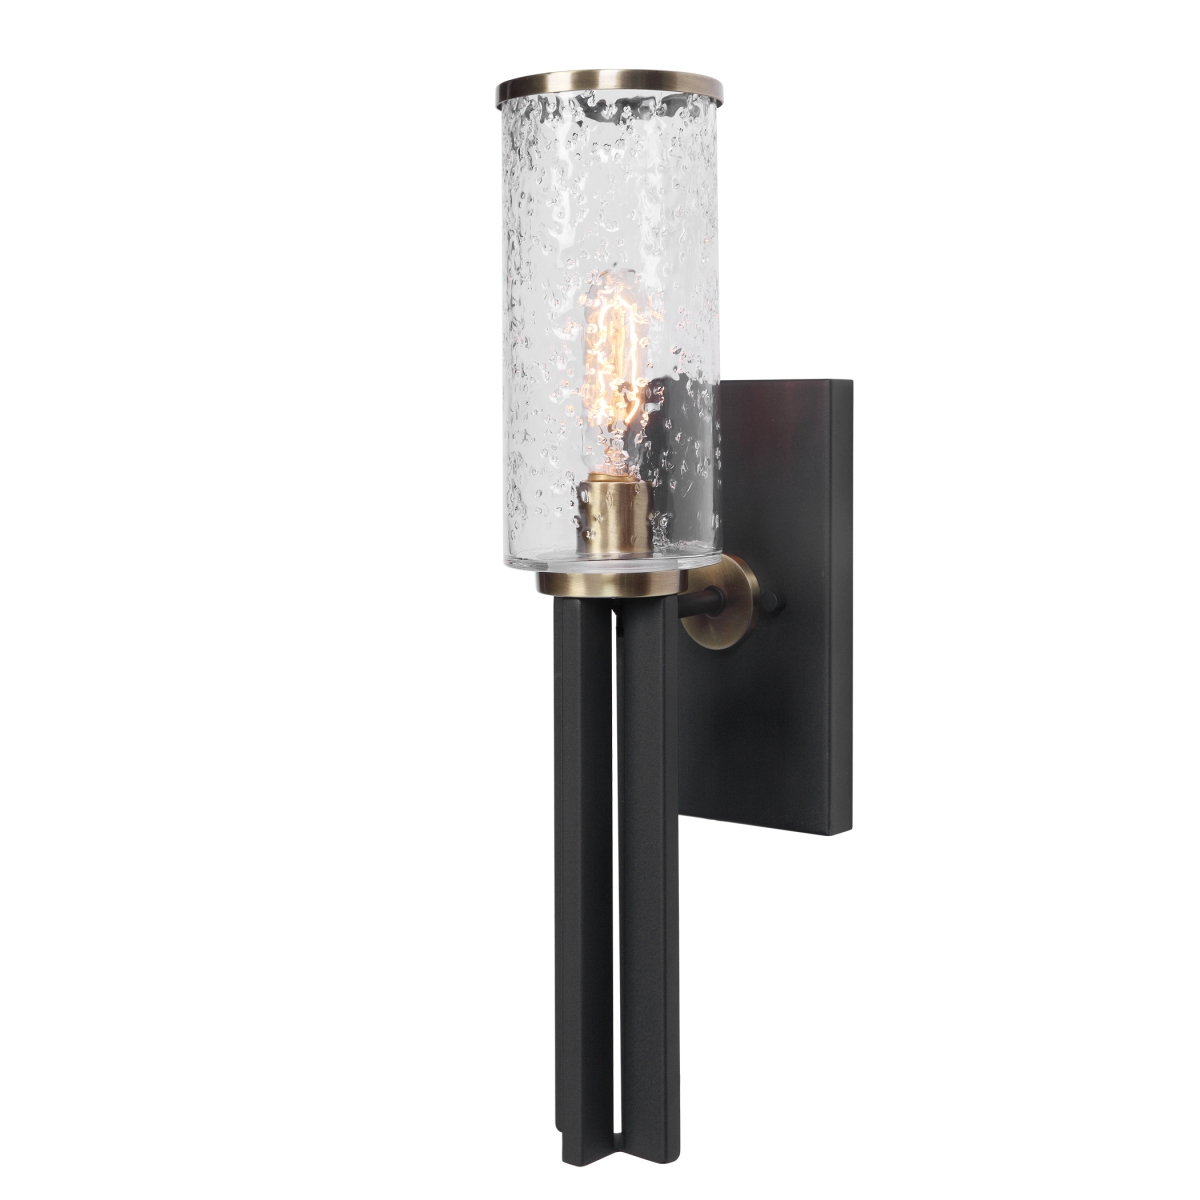 Picture of 212 Main 22522 Jarsdel 1 Industrial Sconce